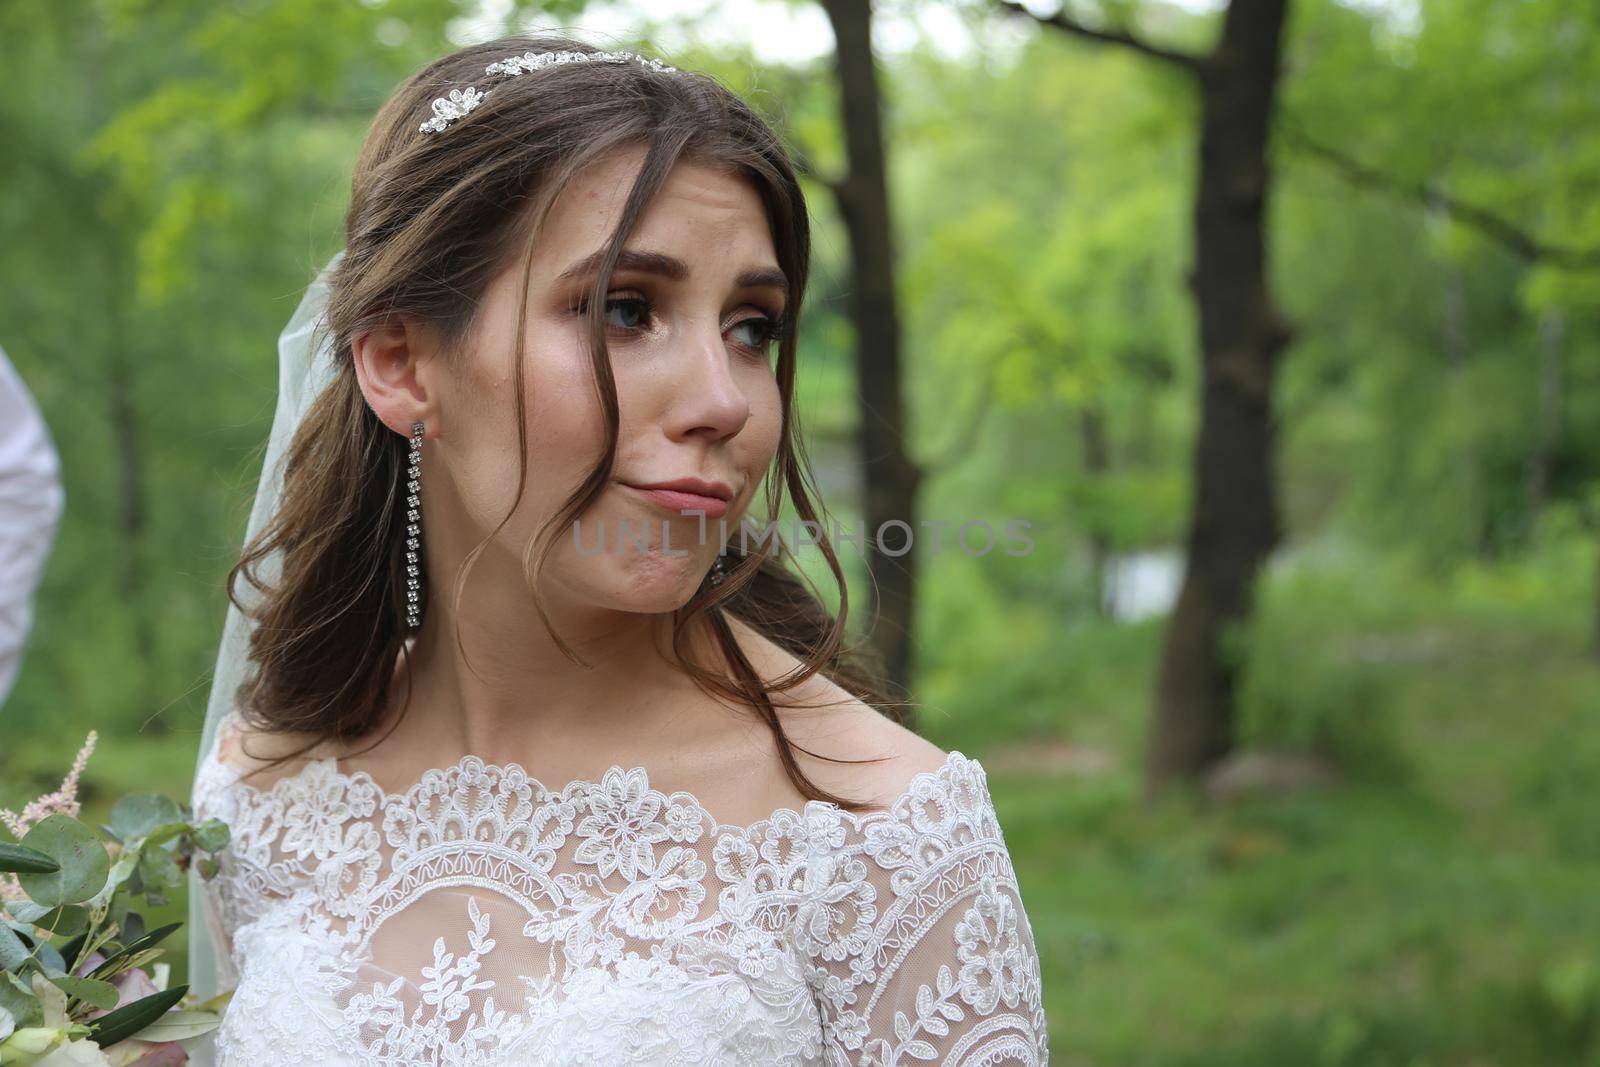 Wedding photography in rustic style emotions of the bride on the nature on the rocks